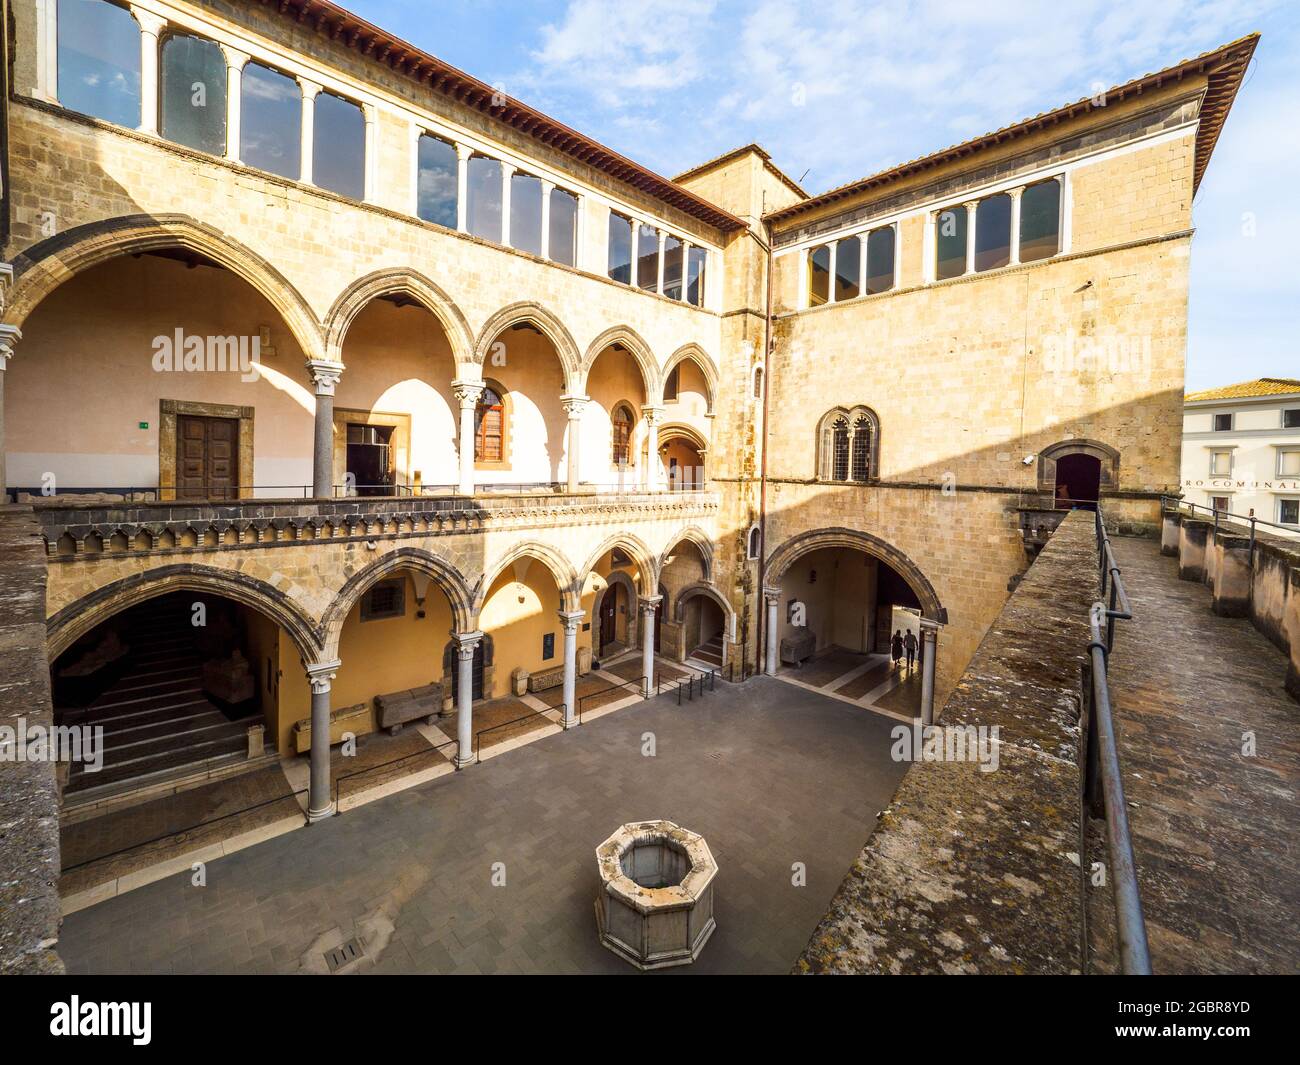 Courtyard in the renaissance Vitelleschi palace that hosts the Tarquinia National Archaeological Museum - Tarquinia, Italy Stock Photo